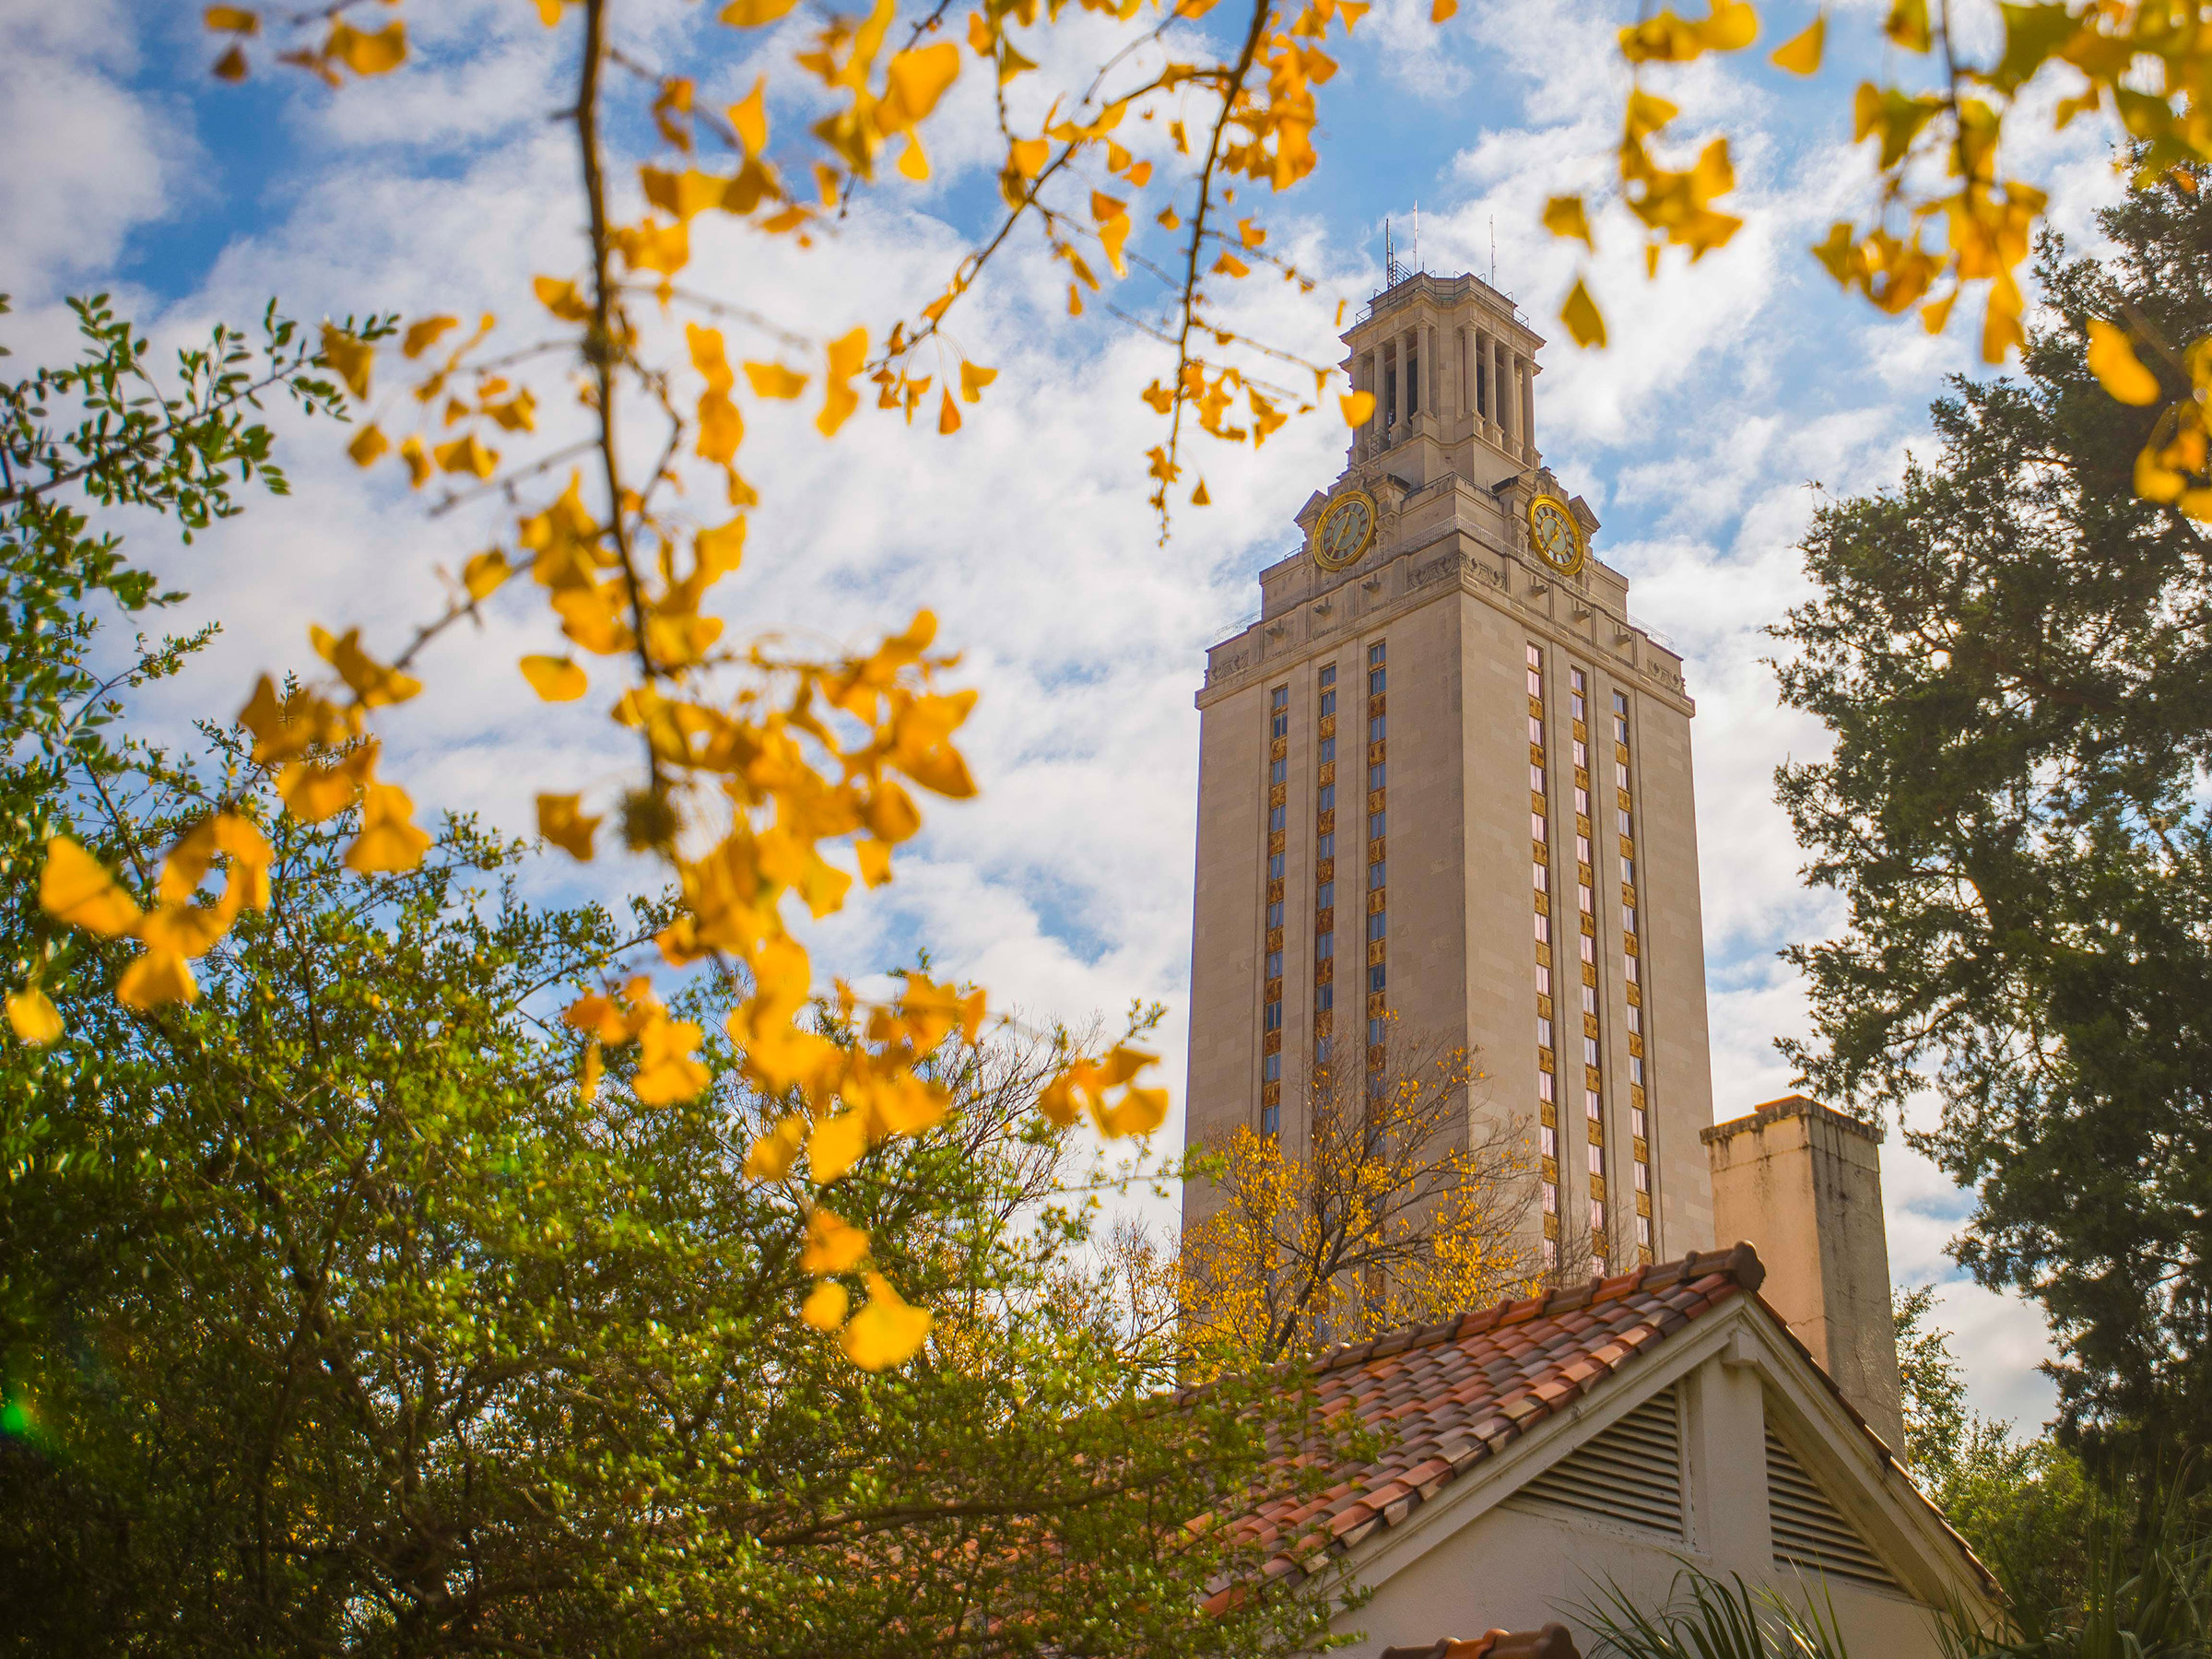 Photo of the UT Tower with fall-color foliage in the foreground.